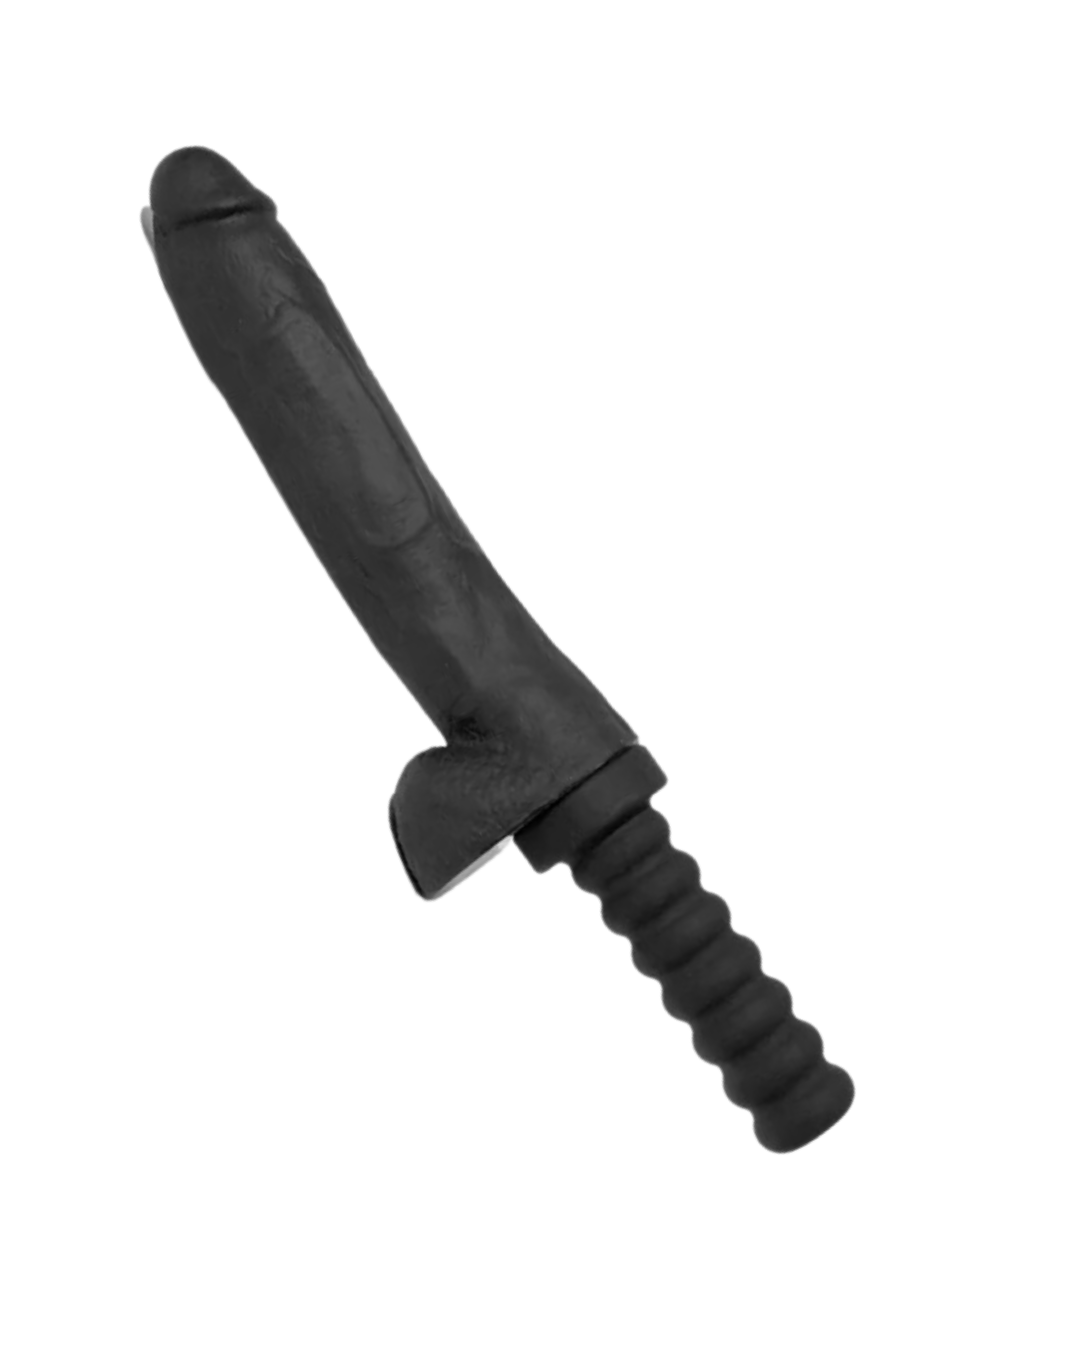 Boneyard 10 Inch Black Silicone Dildo with Handle & Suction Cup Attachment